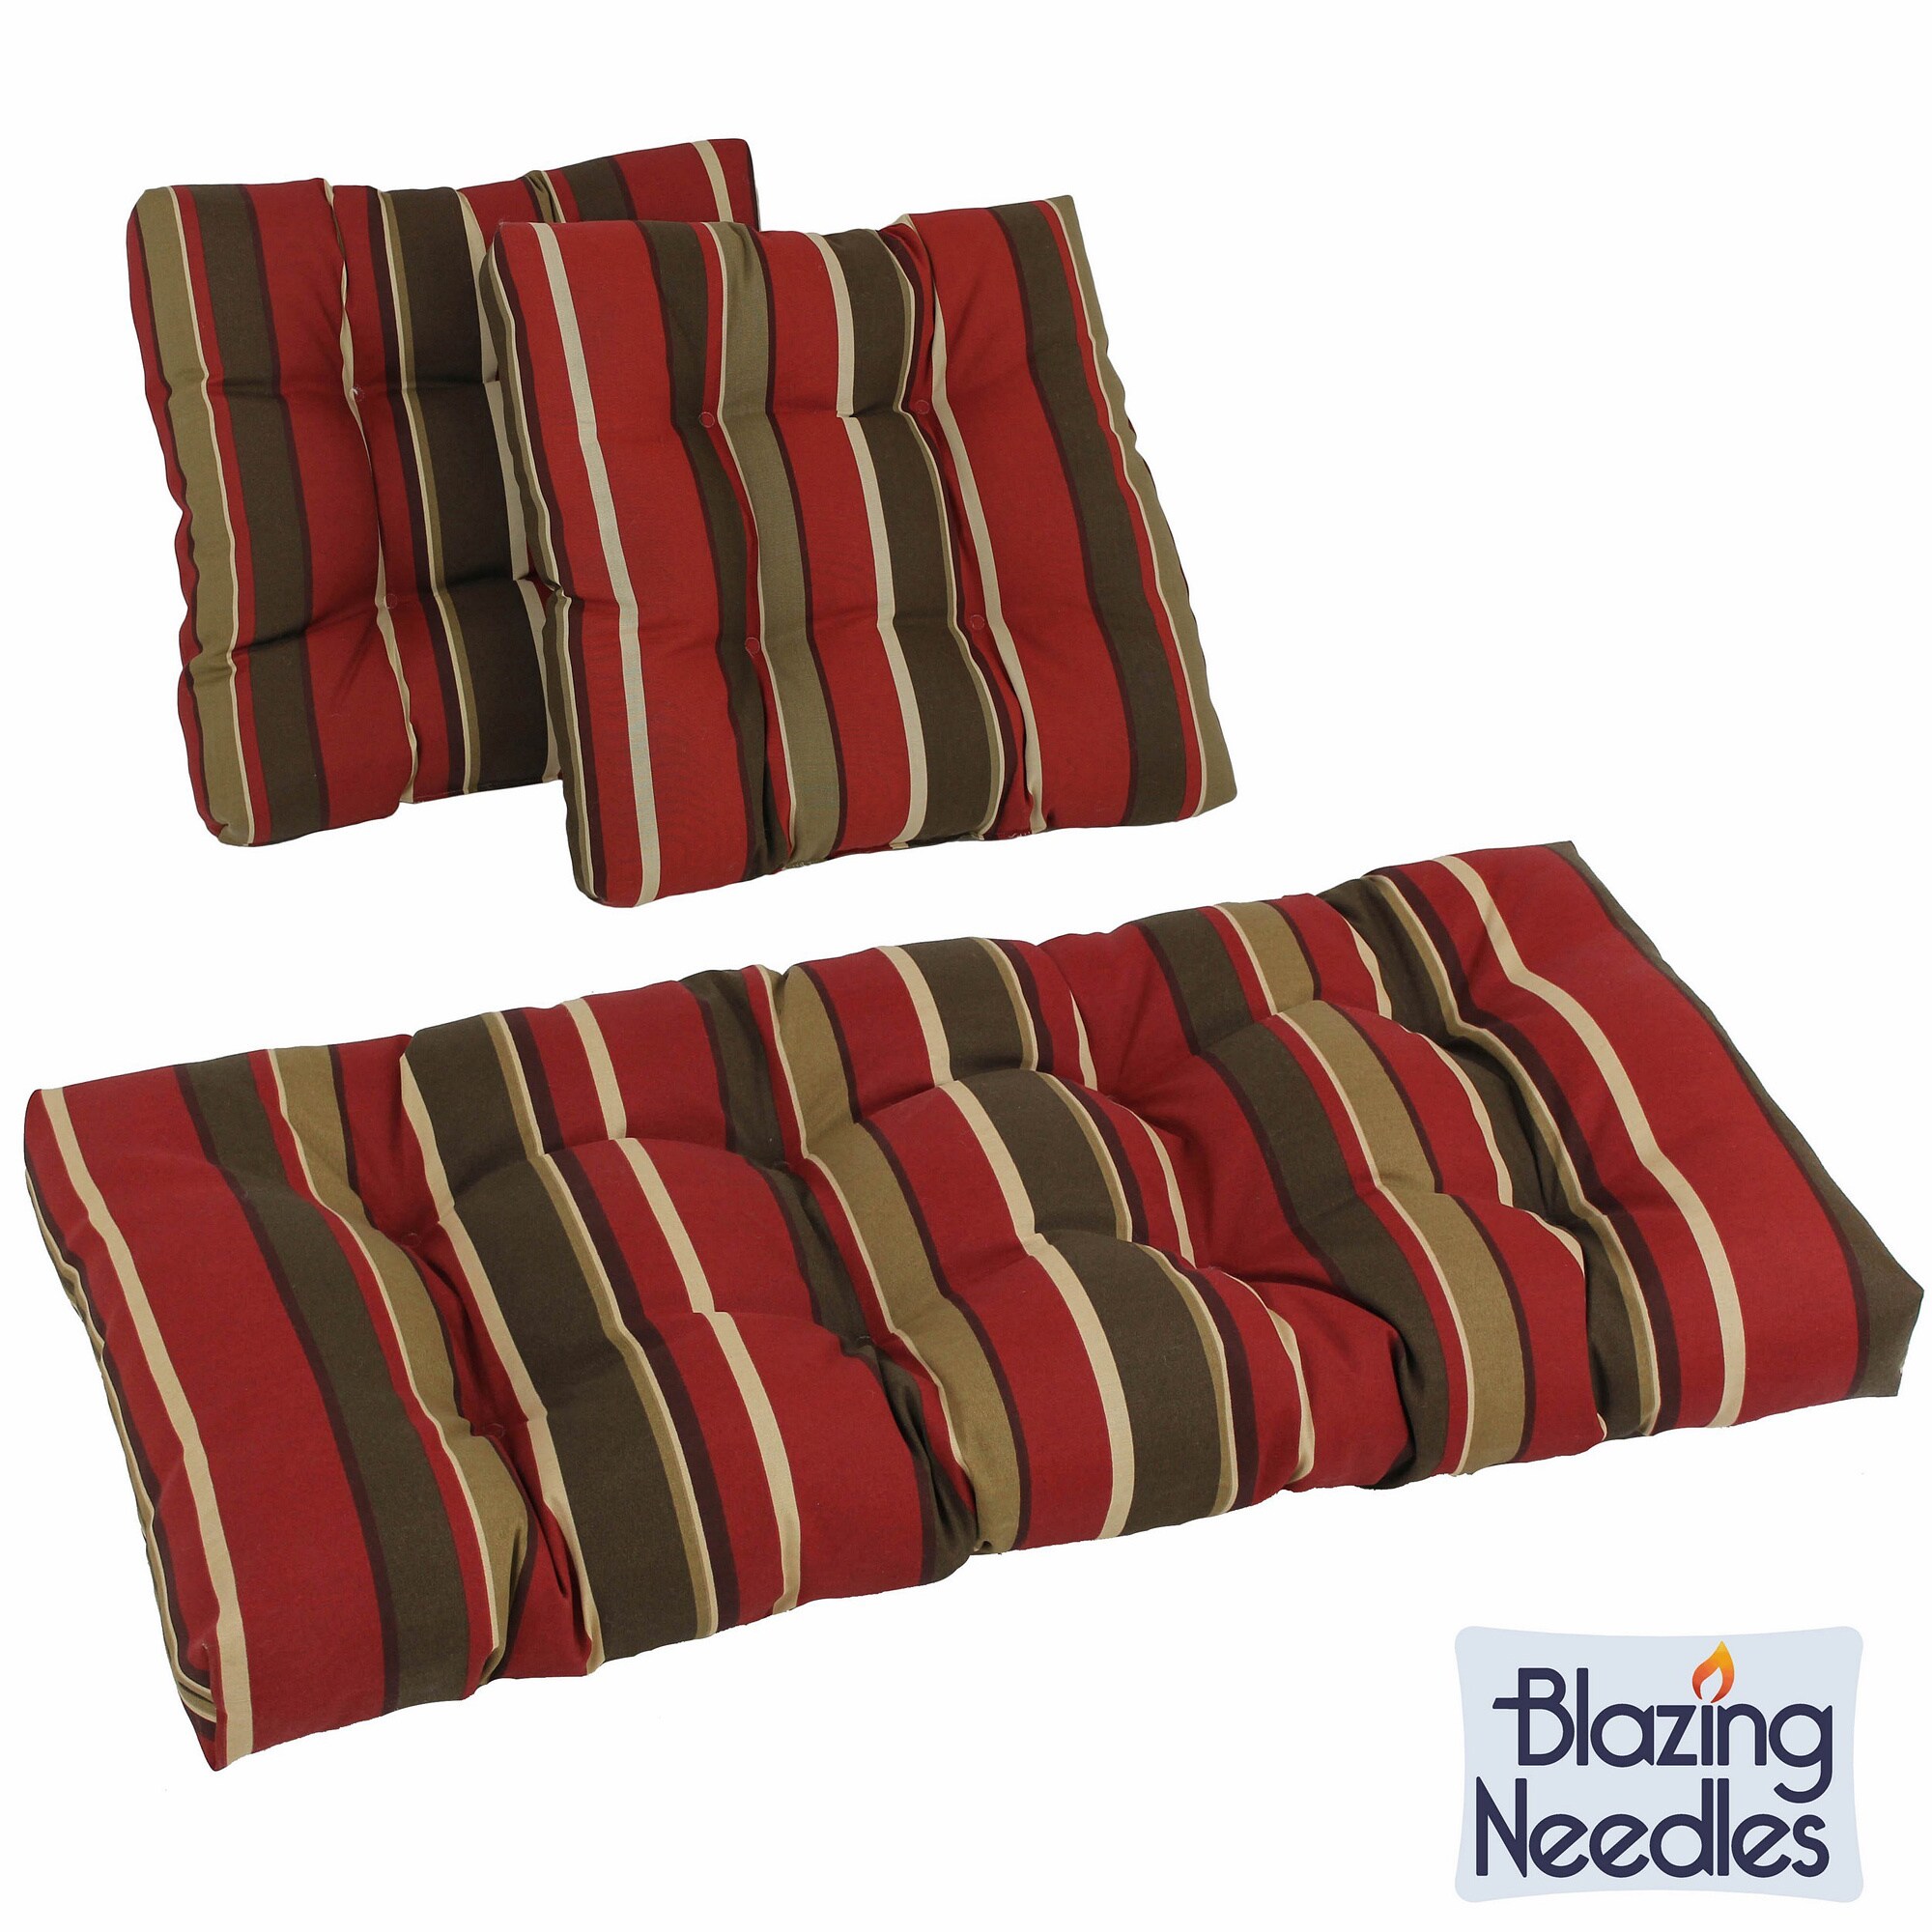 Blazing Needles Set Of 3 All weather Uv resistant Squared Outdoor Settee Group Cushions